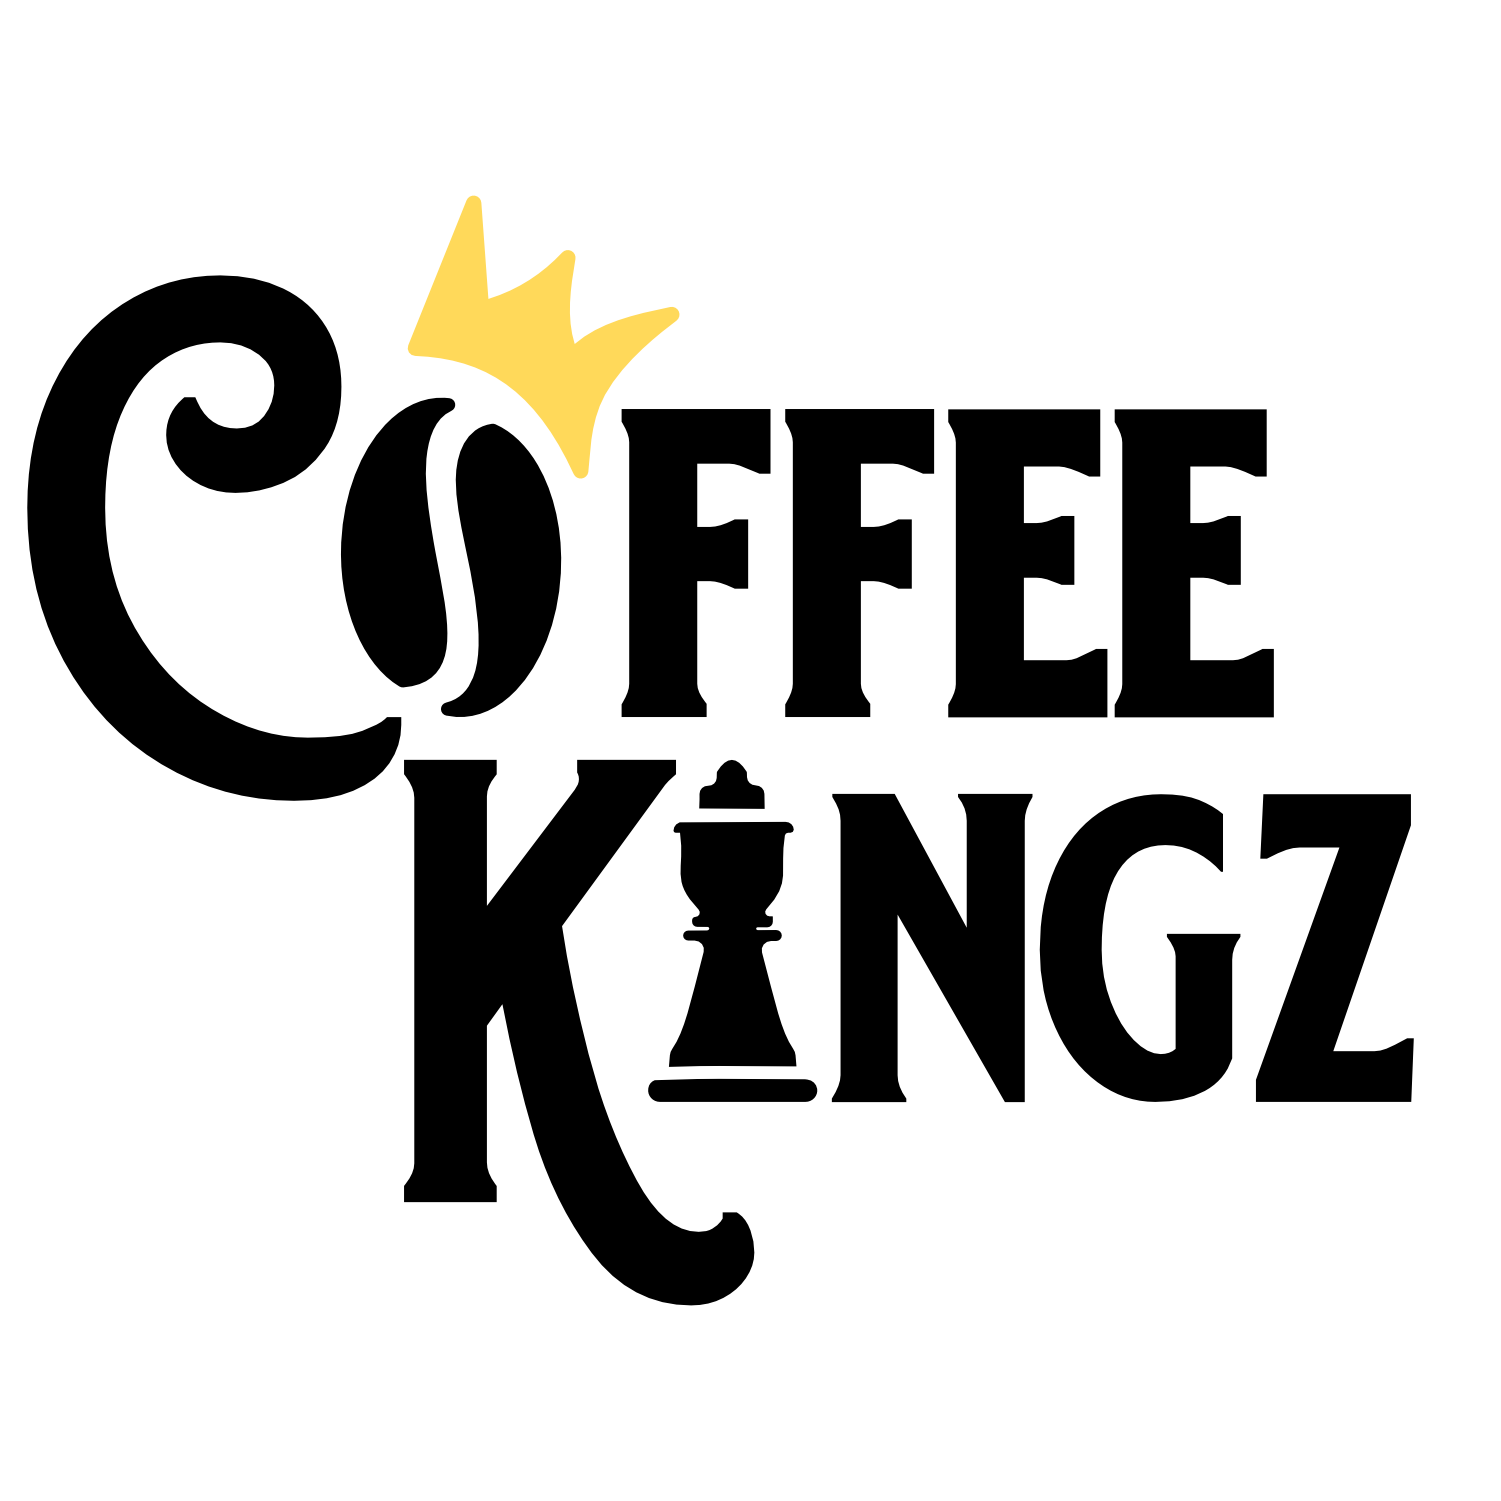 Stylized yellow crown icon of Coffee Kingz on a black background.